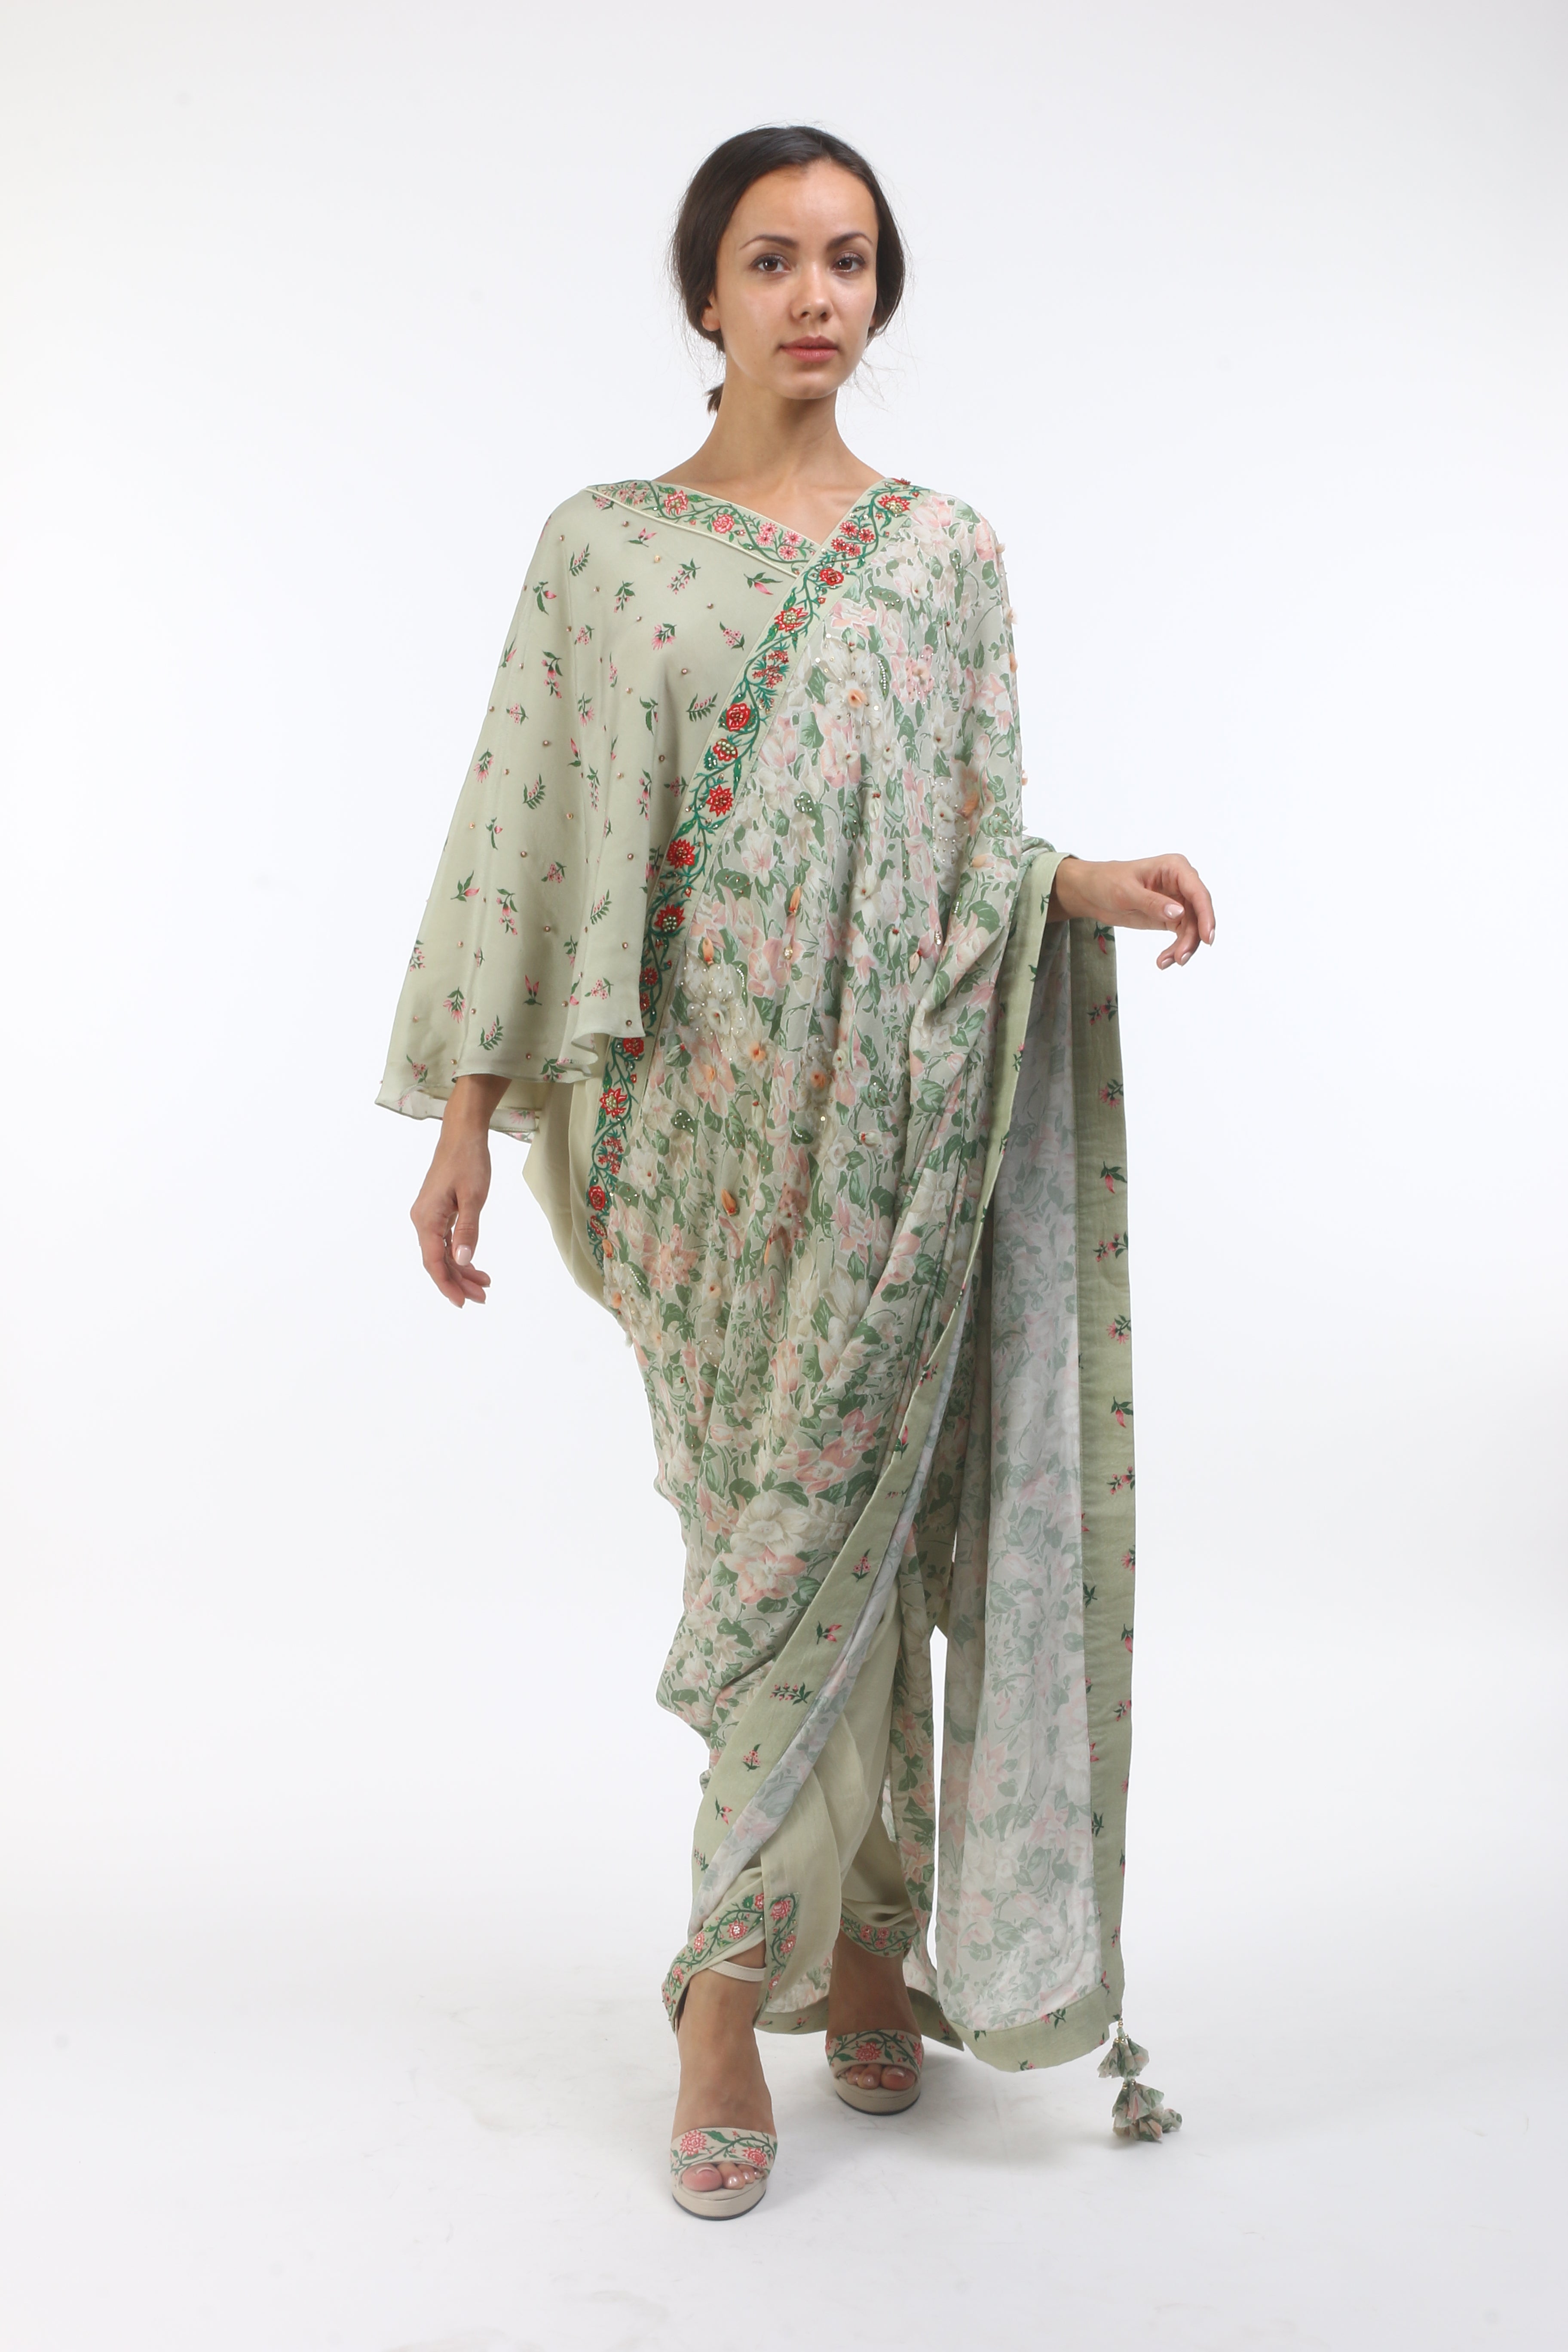 printed and embellished crepe dhoti saree with mumtaz bel border and bouquet printed one shoulder blouse.